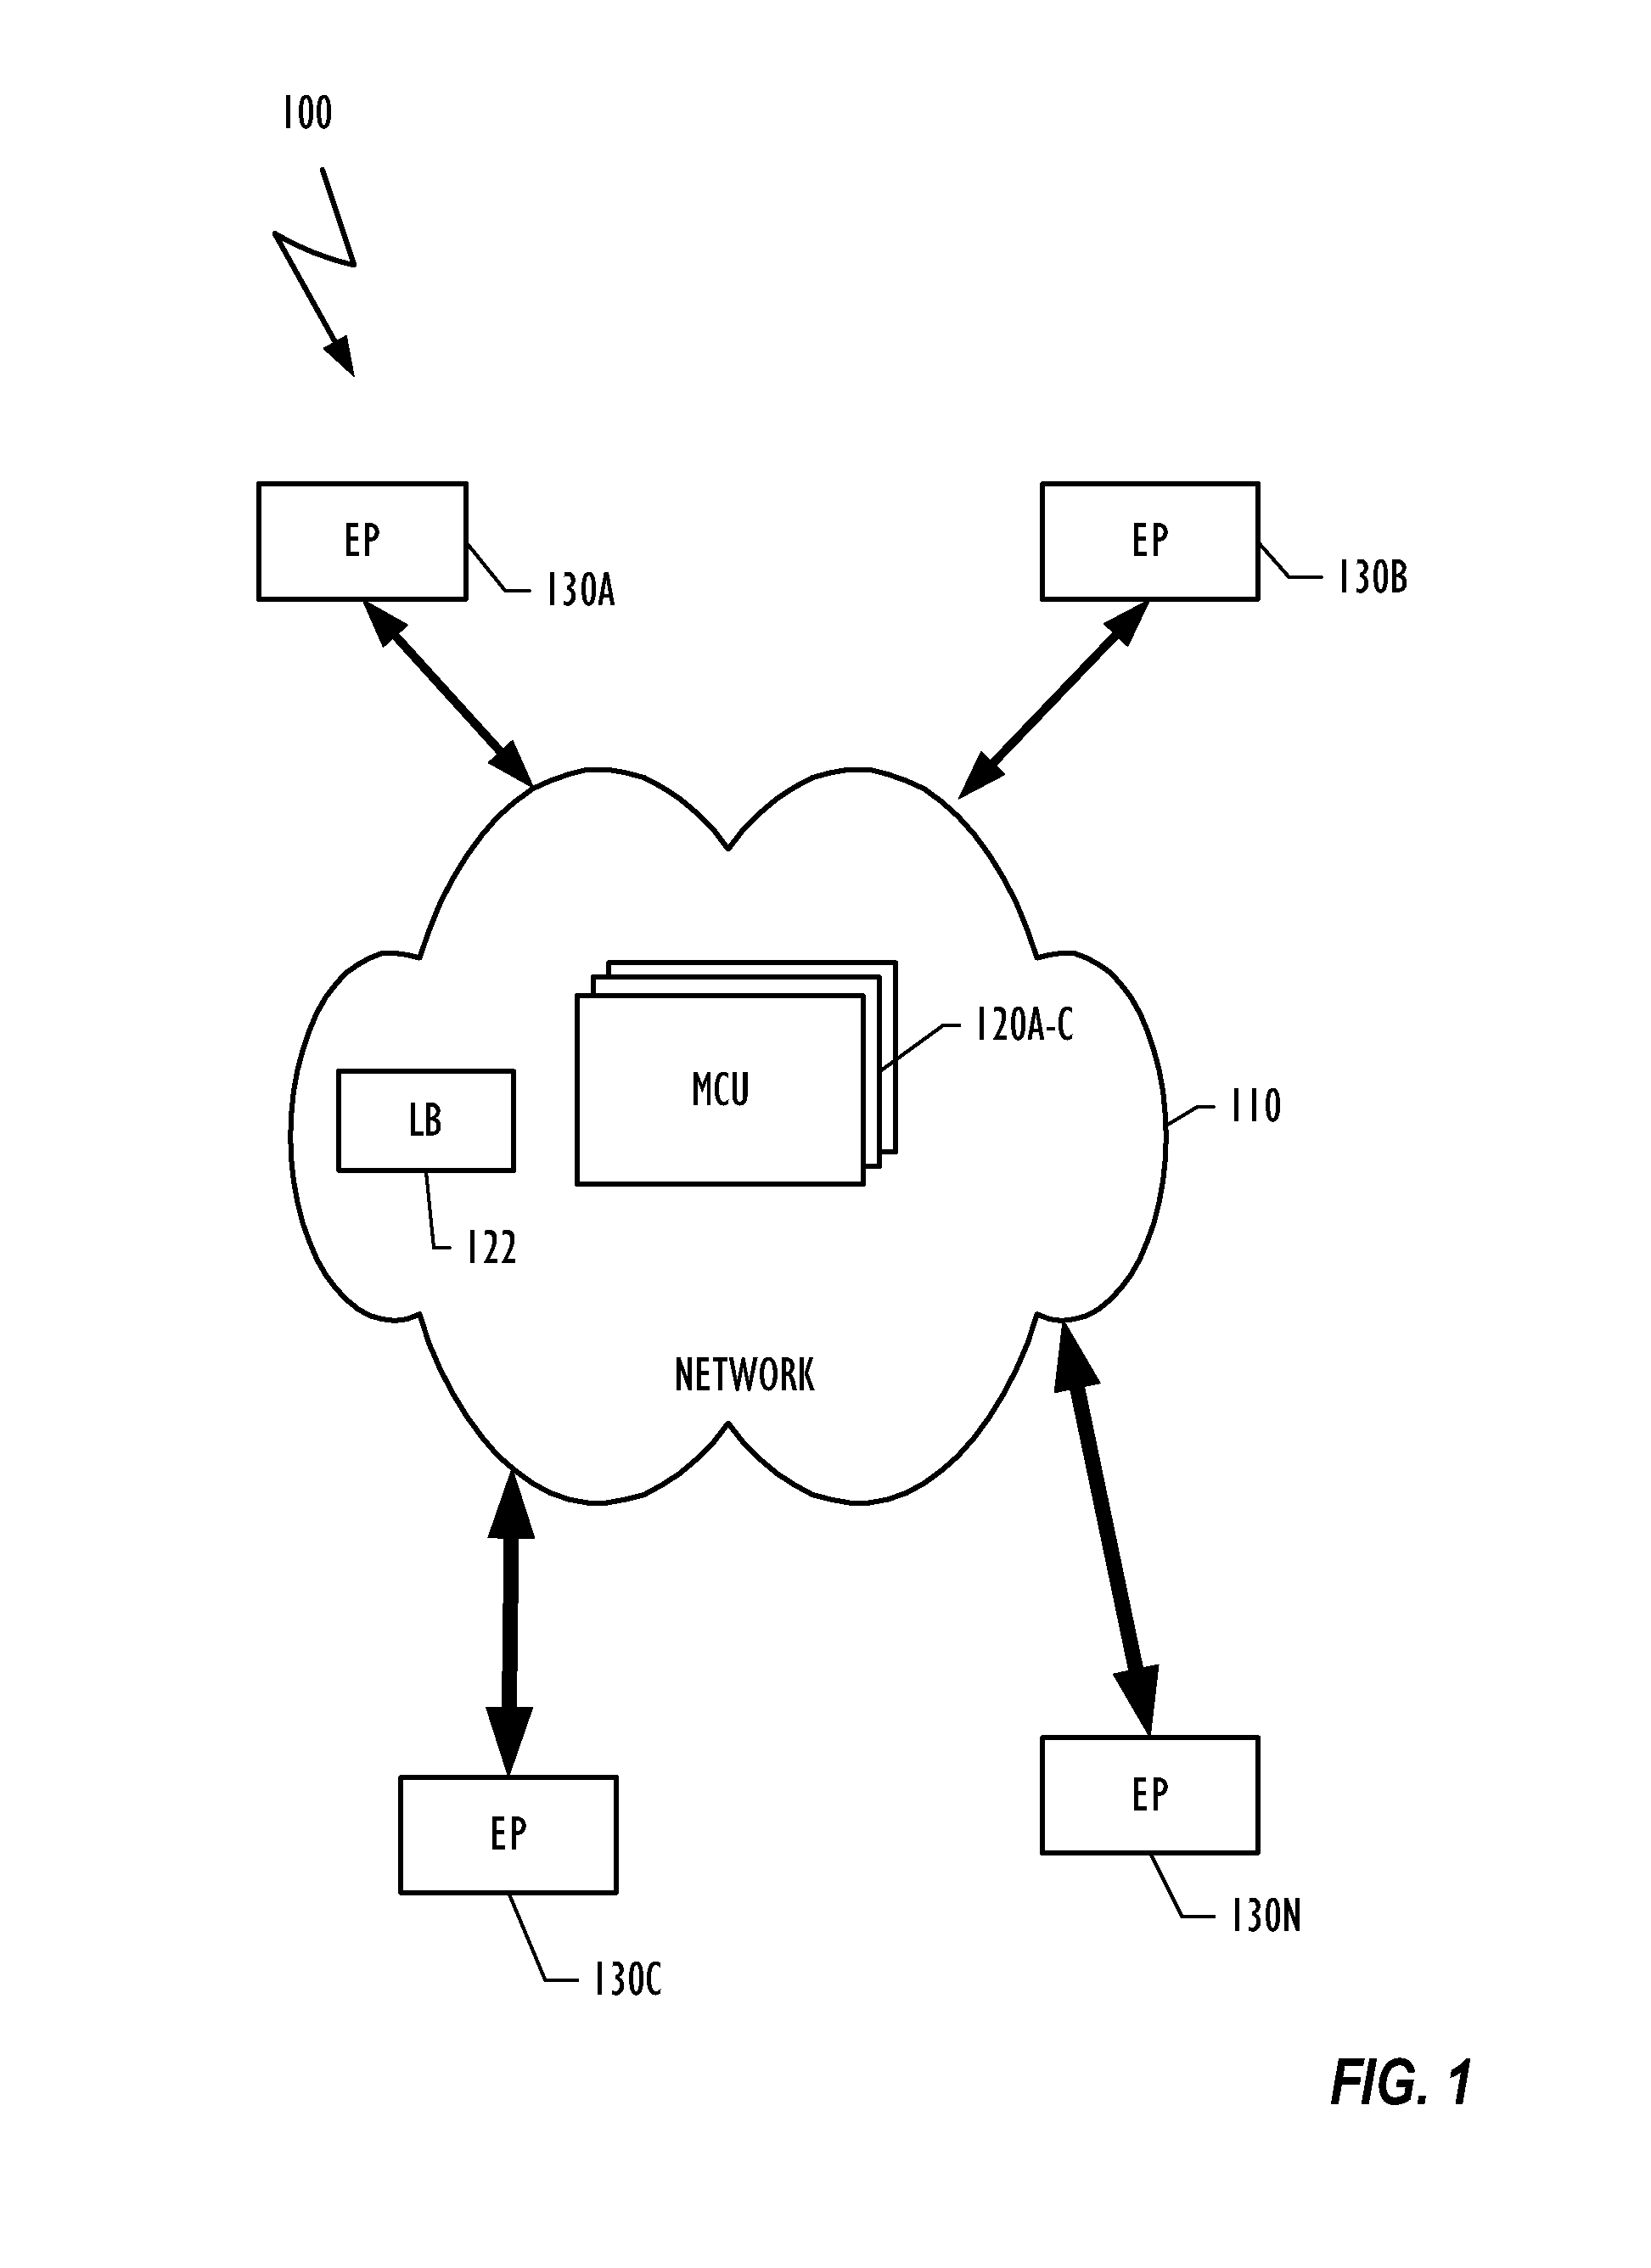 Method and System for Adding Translation in a Videoconference